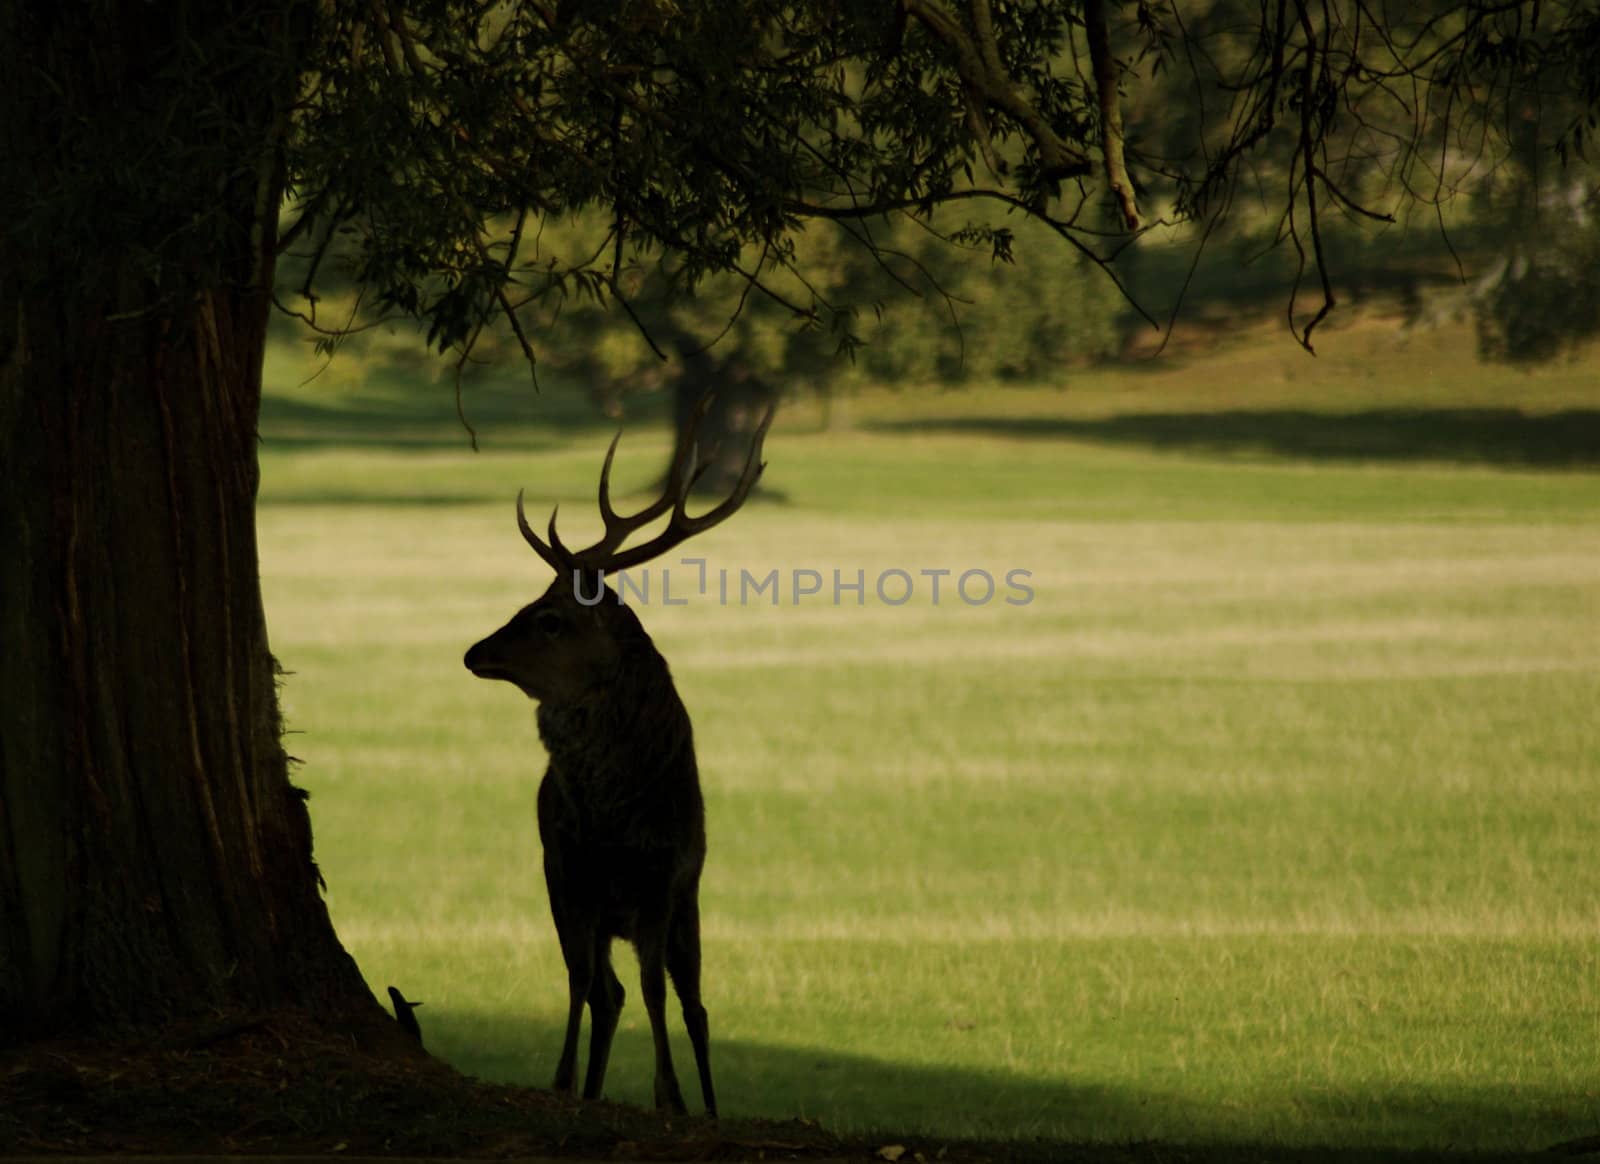 Stag standing under the shade of a tree in silhouette, with antlers visible, with copy space.